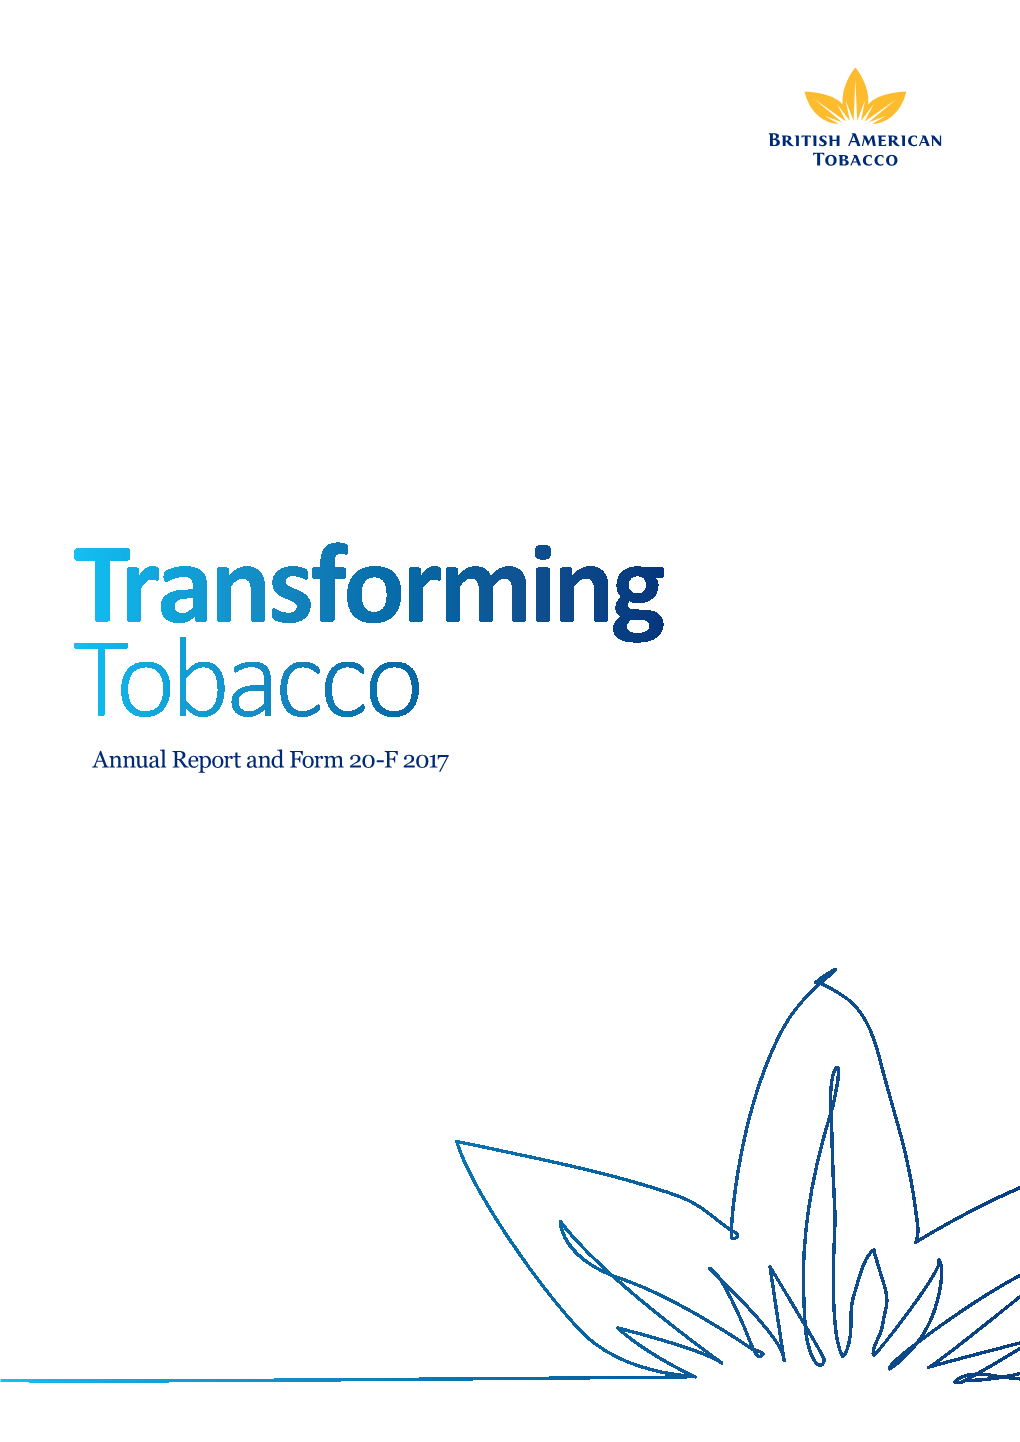 Transforming Tobacco Annual Report and Form 20-F 2017 Contents